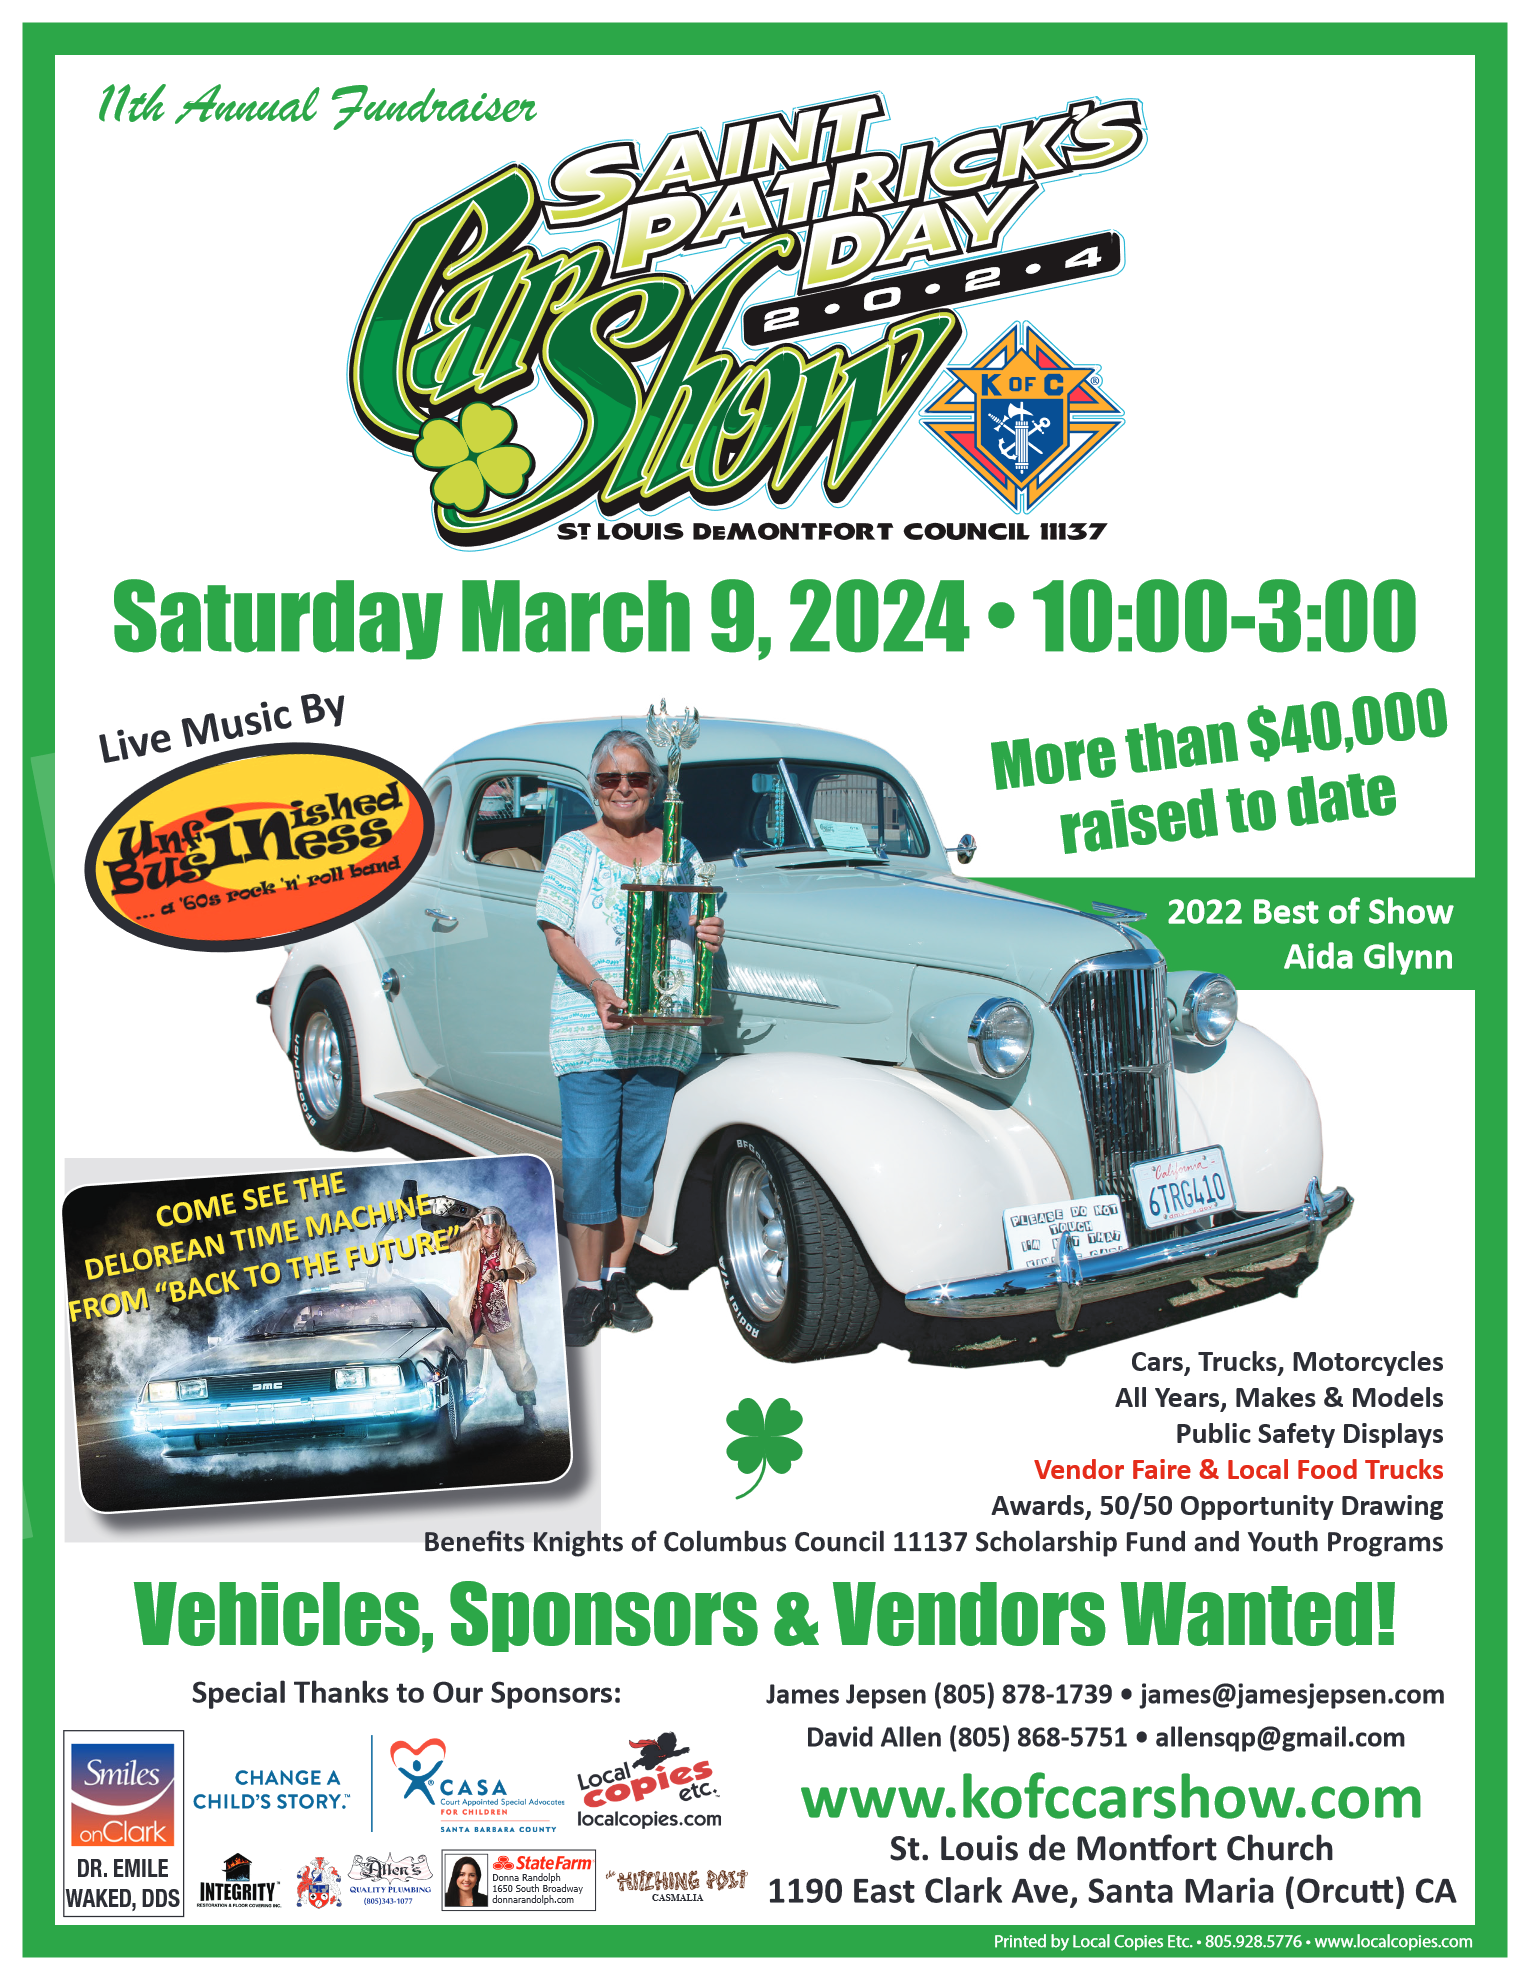 Knights of Columbus Car Show